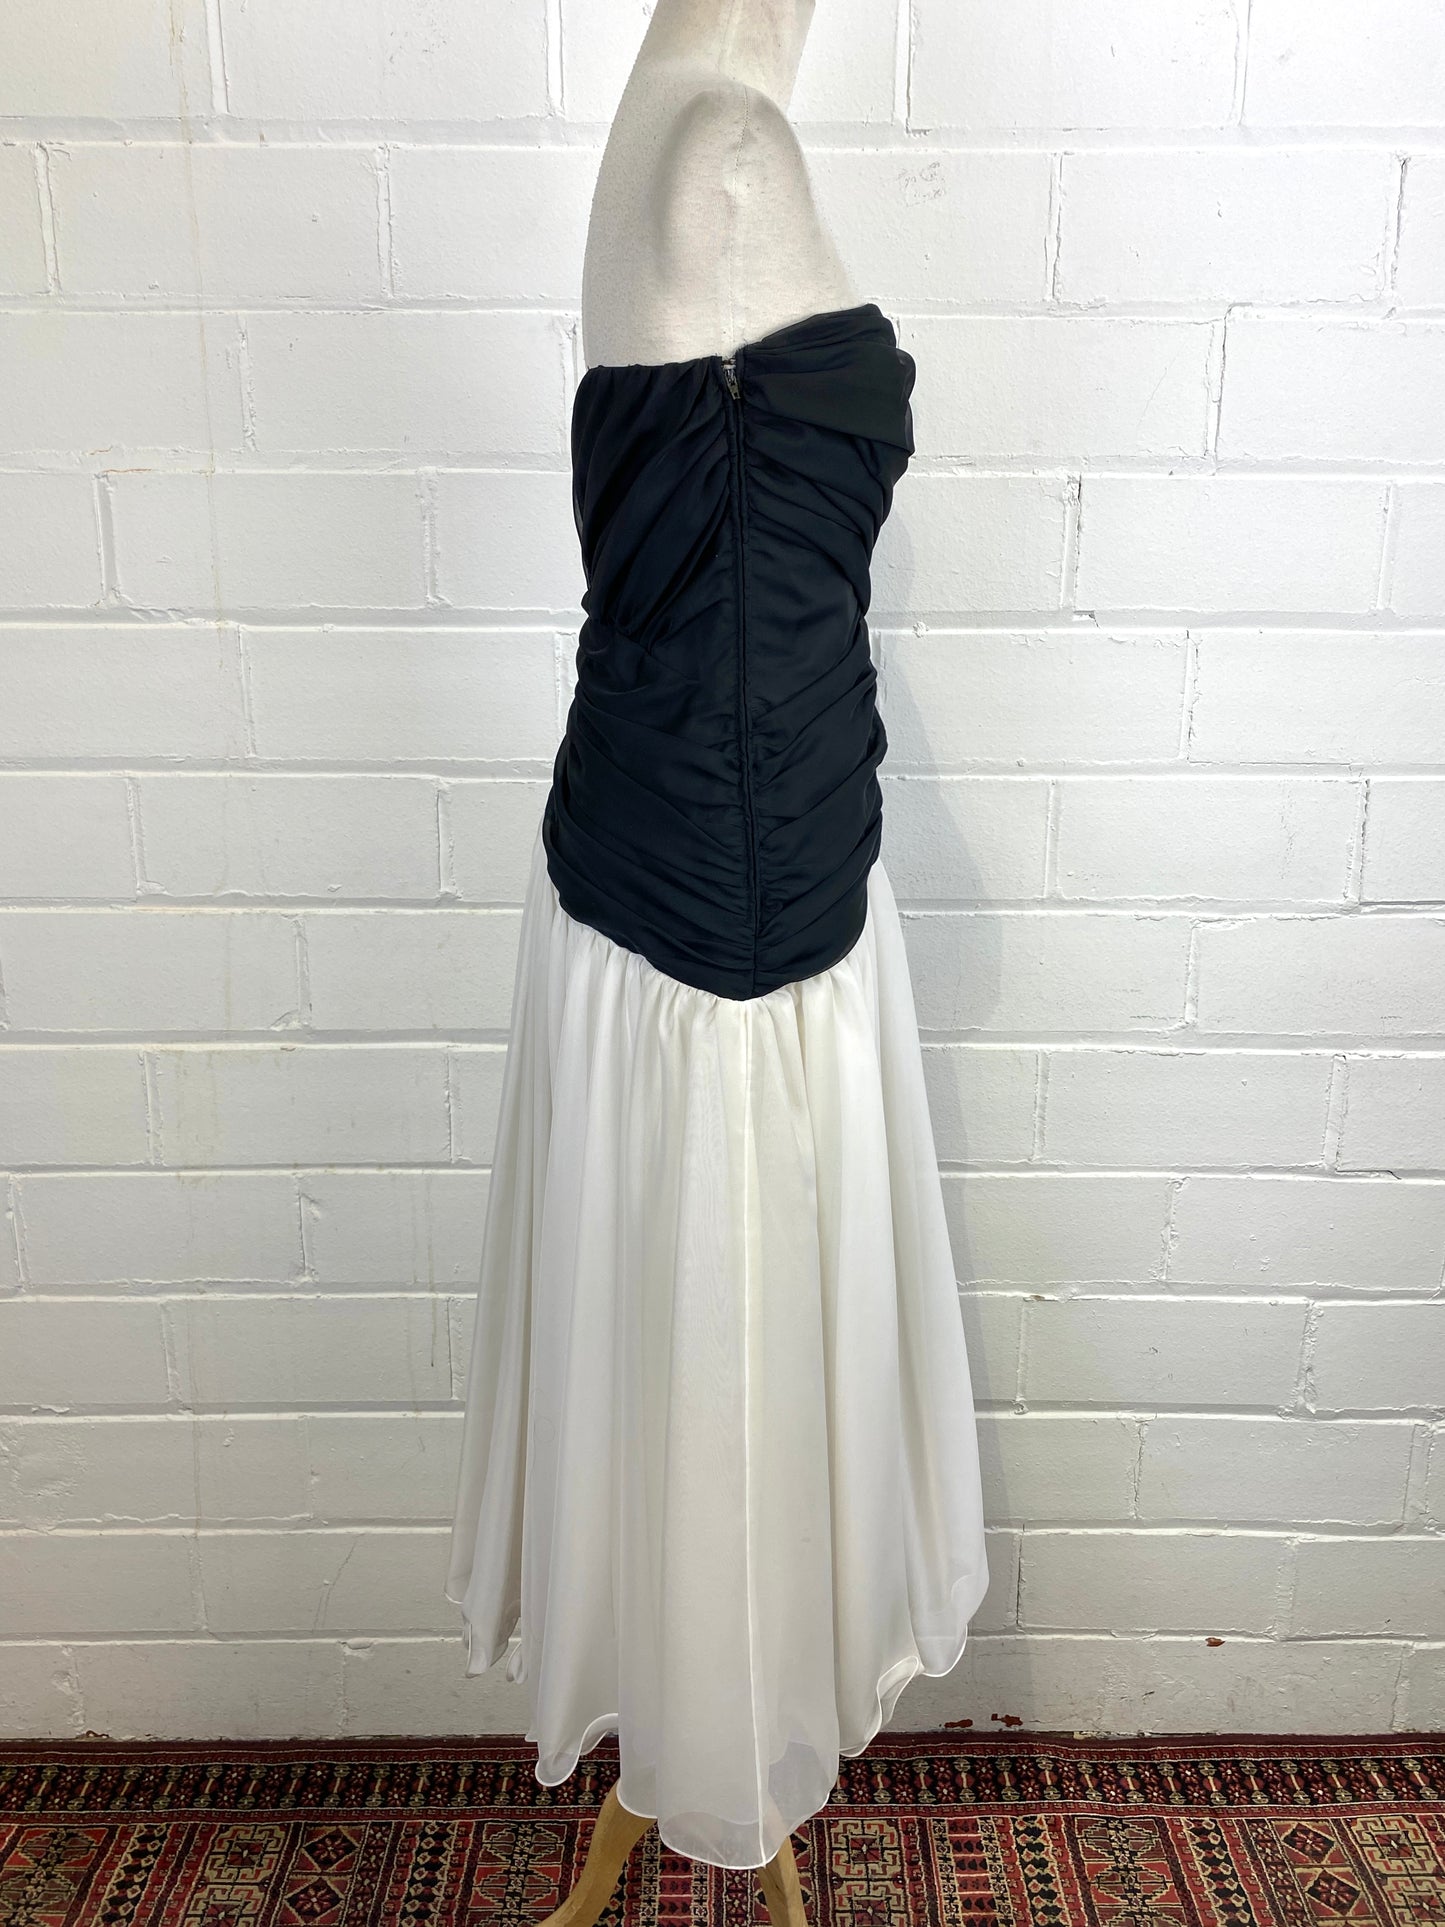 1980s cocktail dress black and white chiffon with bow on the side, strapless vintage party dress frank usher